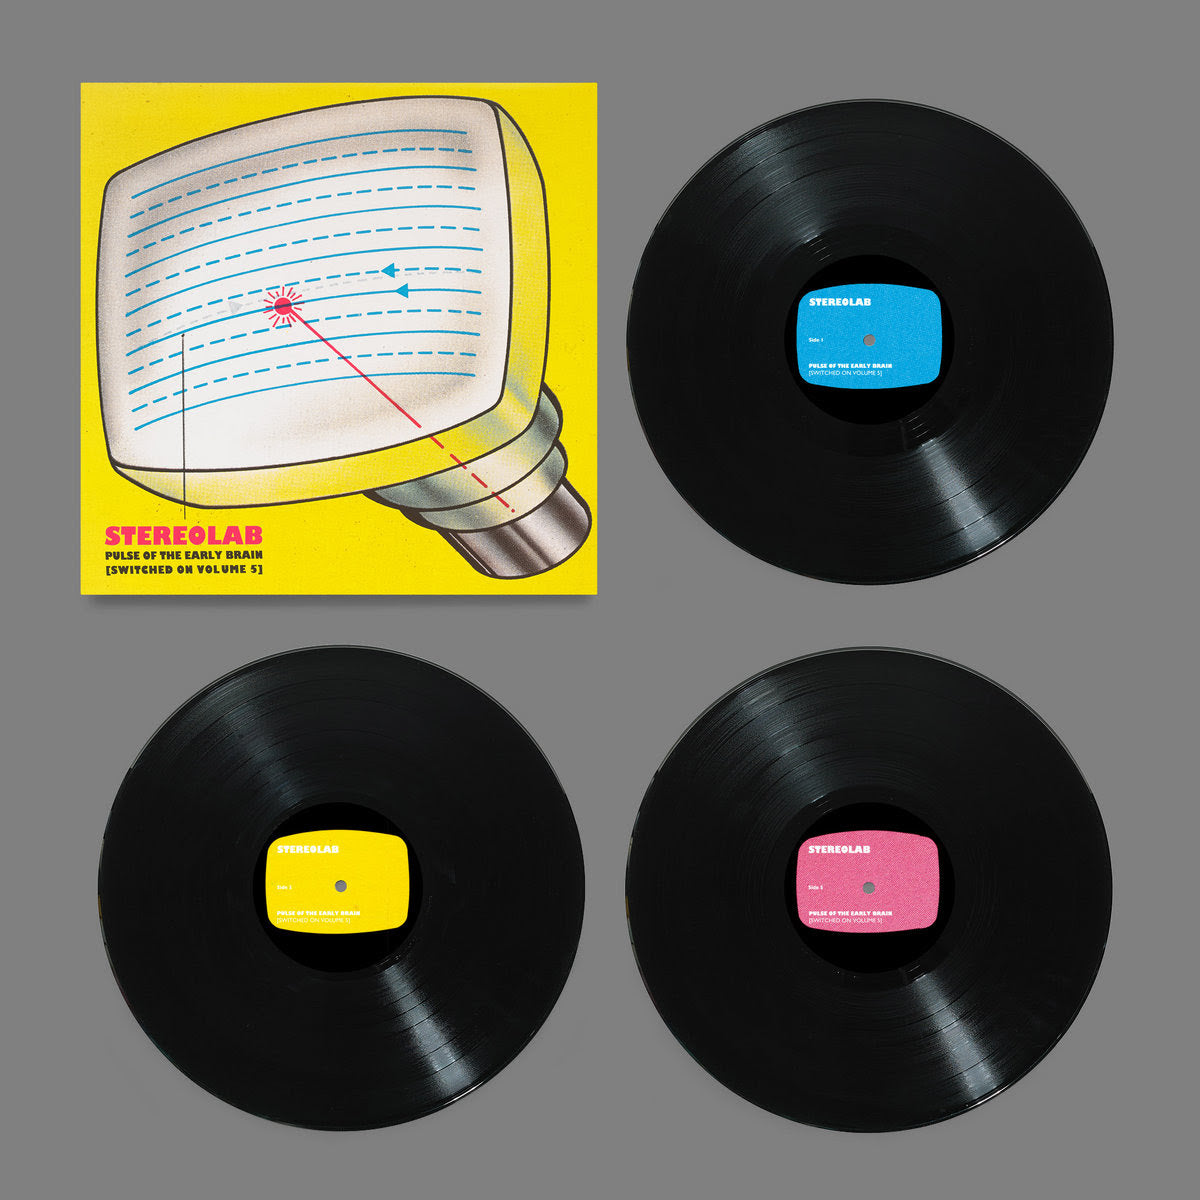 
                  
                    Stereolab - Pulse Of The Early Brain [Switched On Vol. 5] | Buy on Vinyl LP
                  
                